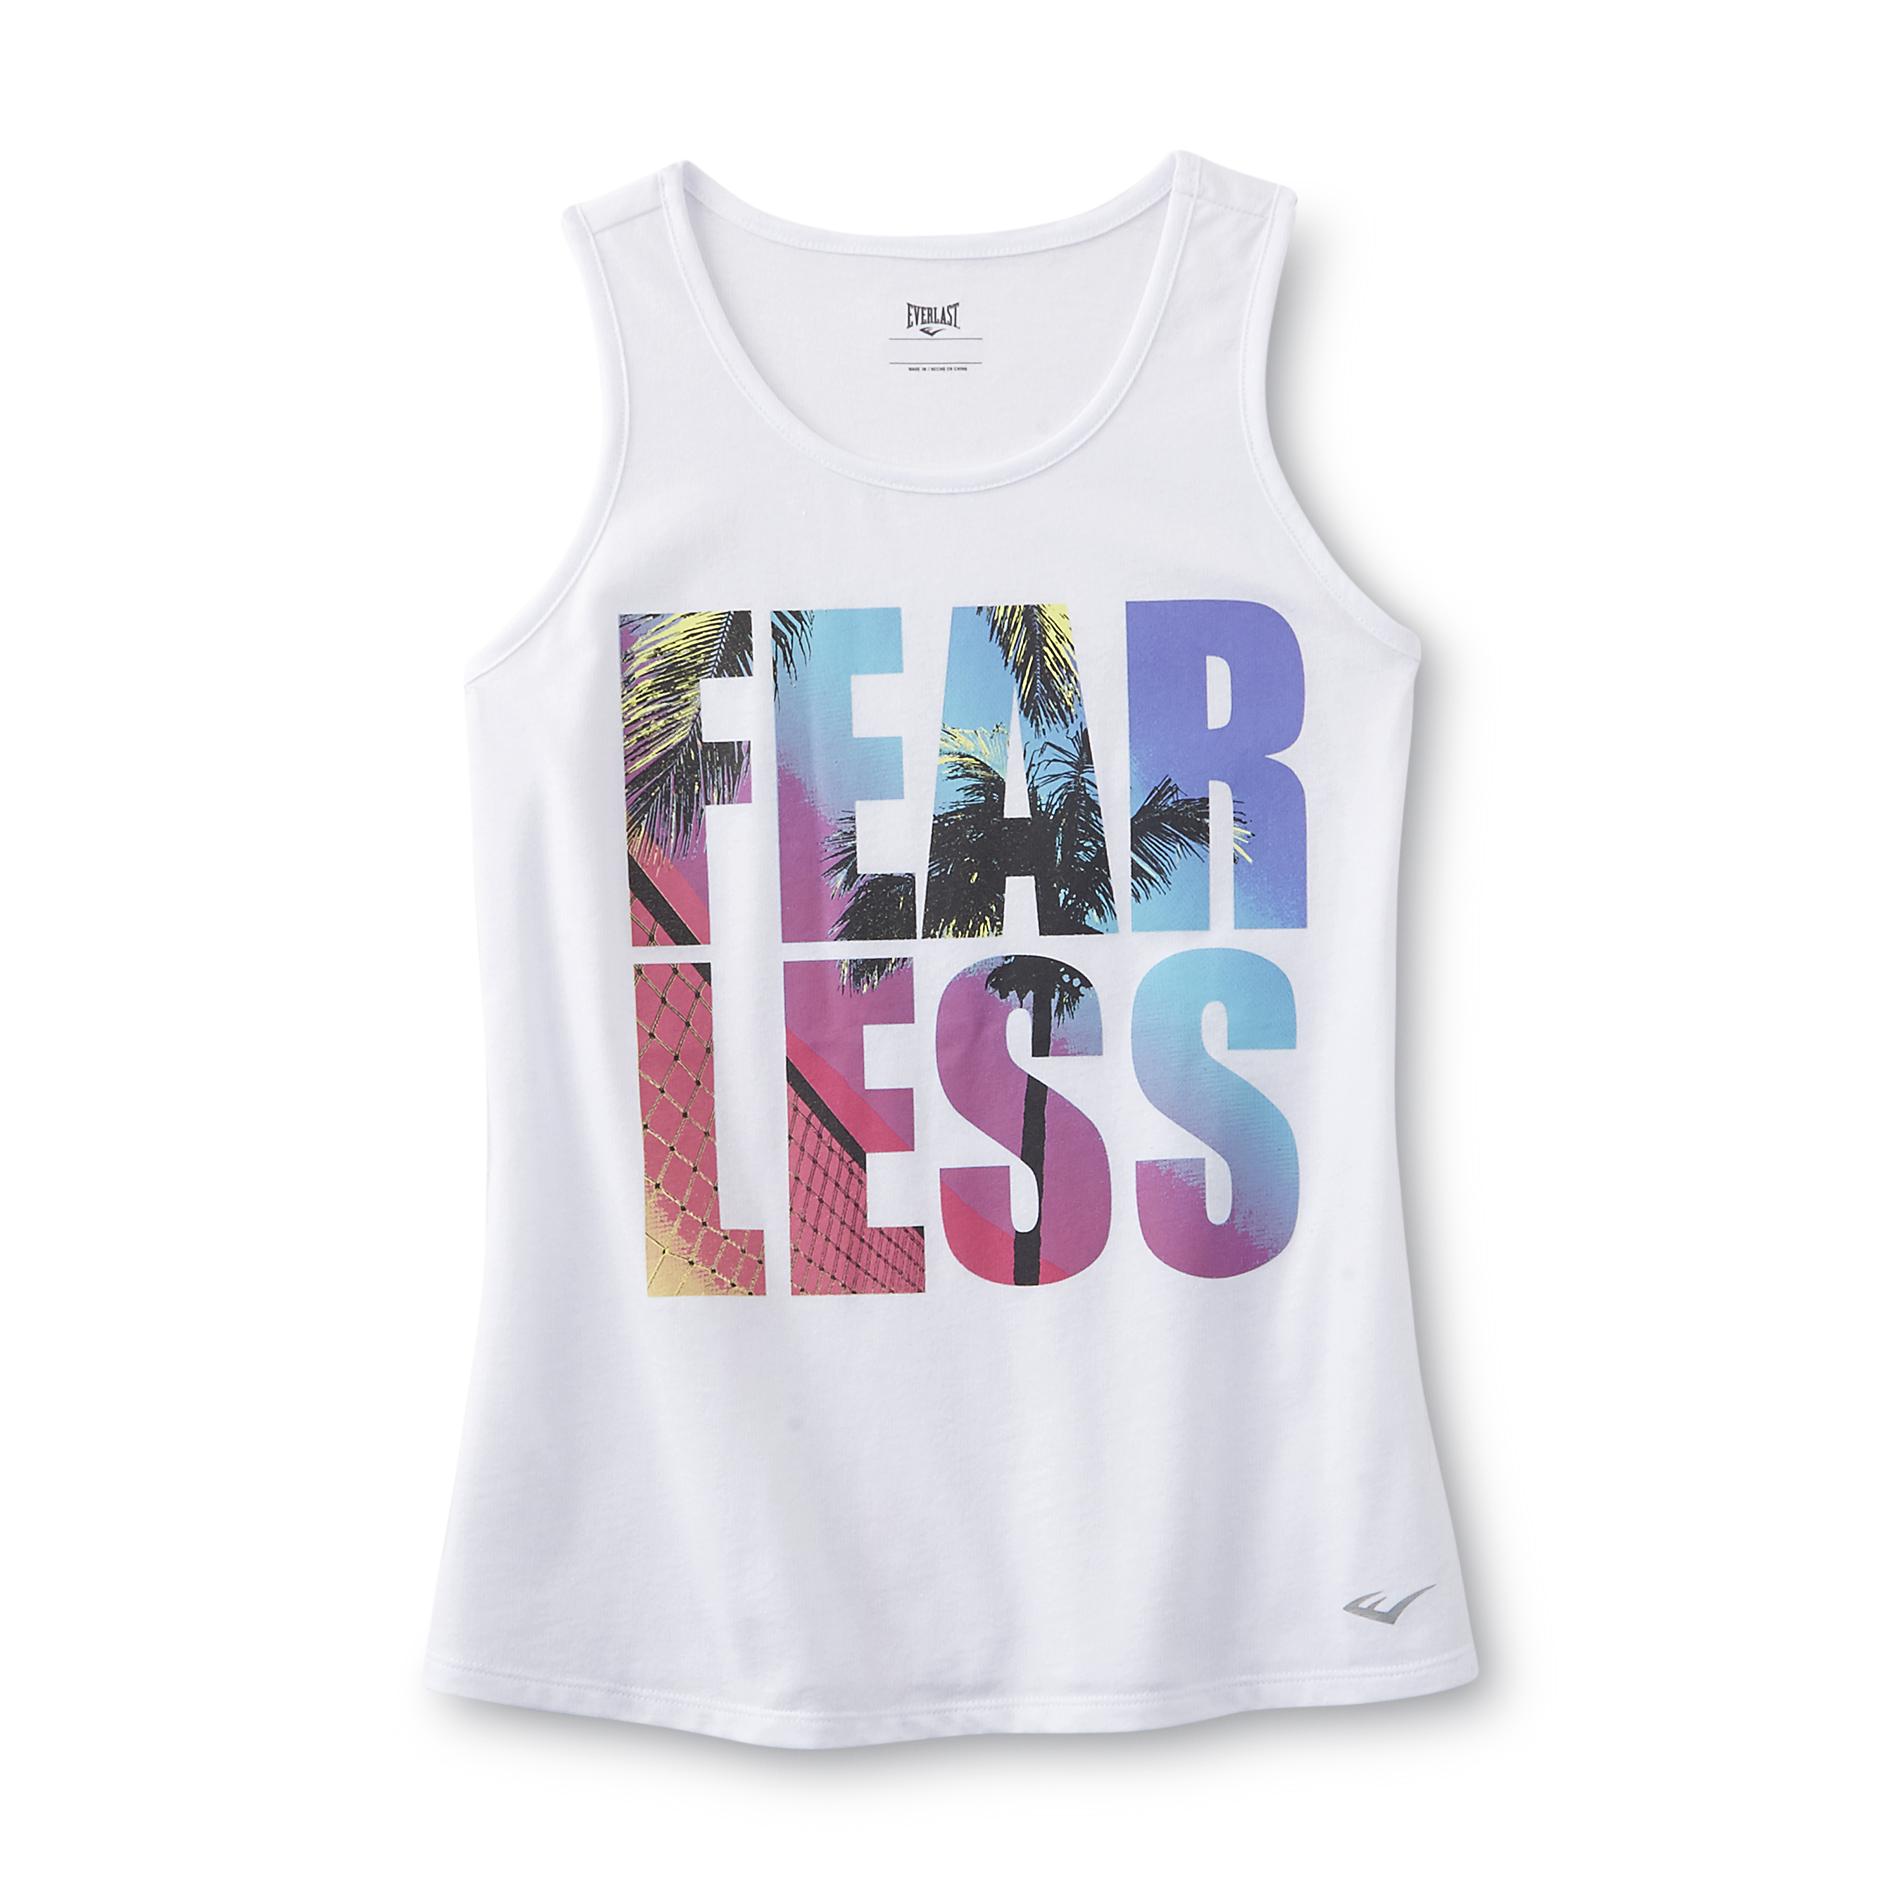 Girl's Graphic Tank Top - Fearless